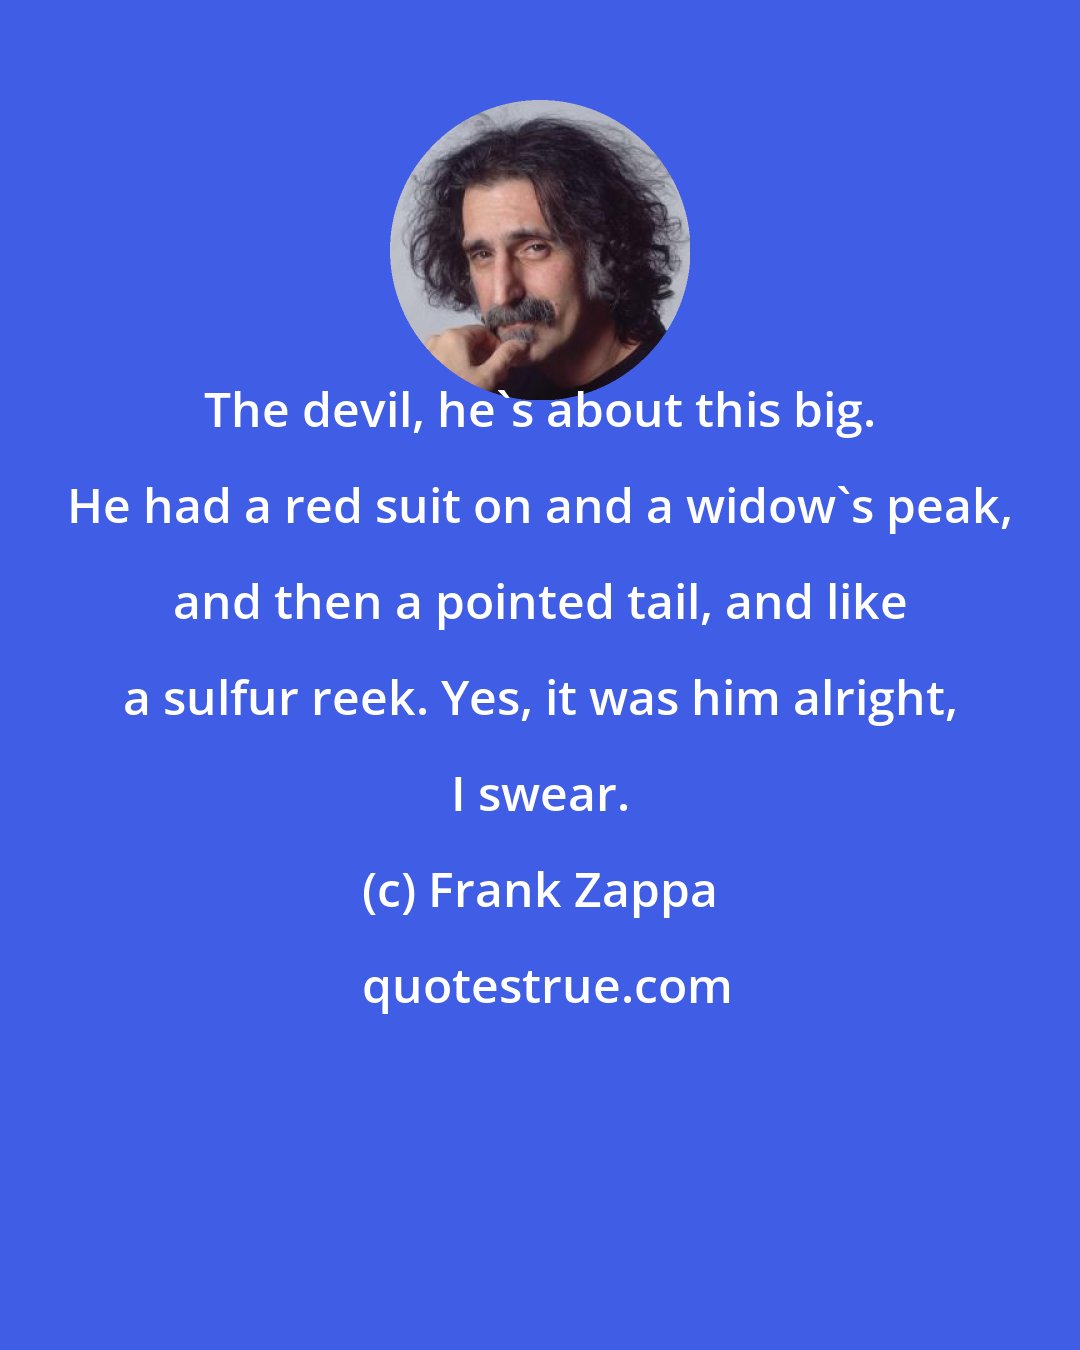 Frank Zappa: The devil, he's about this big. He had a red suit on and a widow's peak, and then a pointed tail, and like a sulfur reek. Yes, it was him alright, I swear.